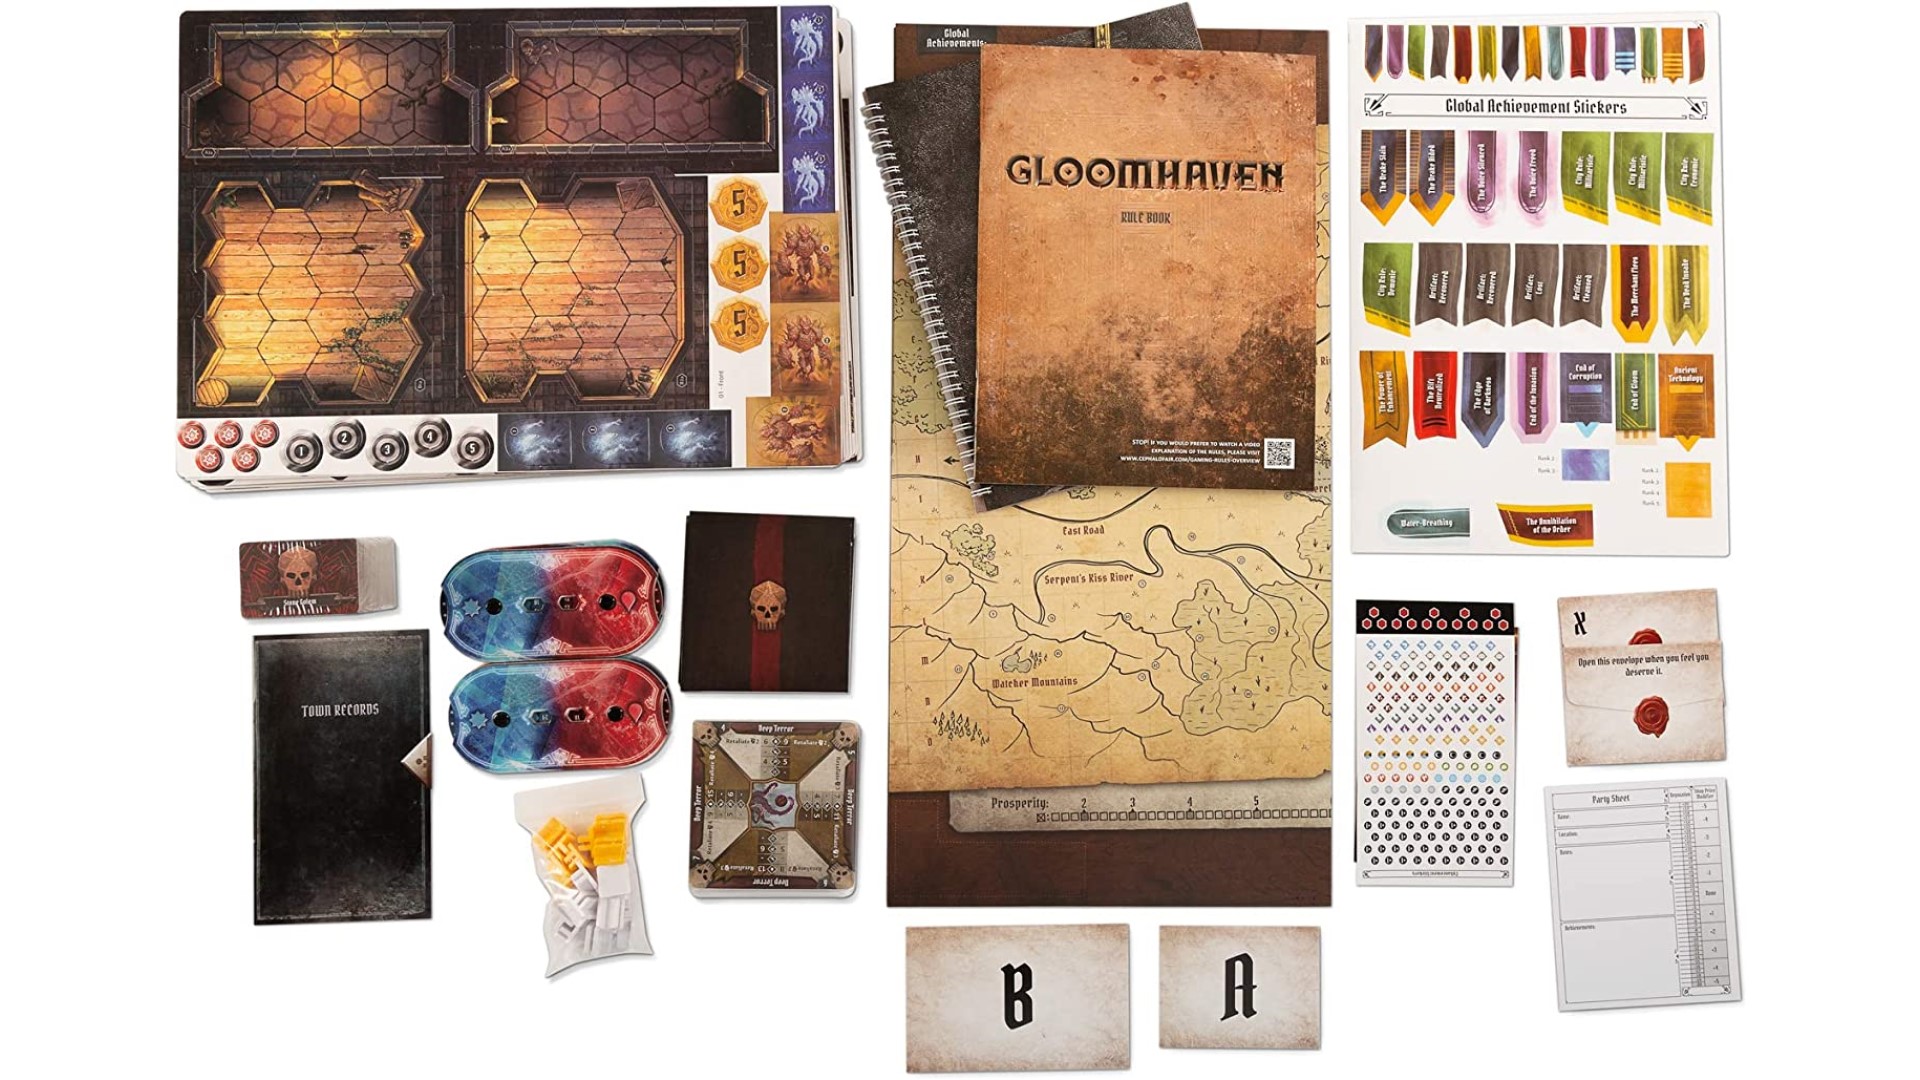 Gloomhaven review - booklets, boards, handouts, and stickers from inside the box